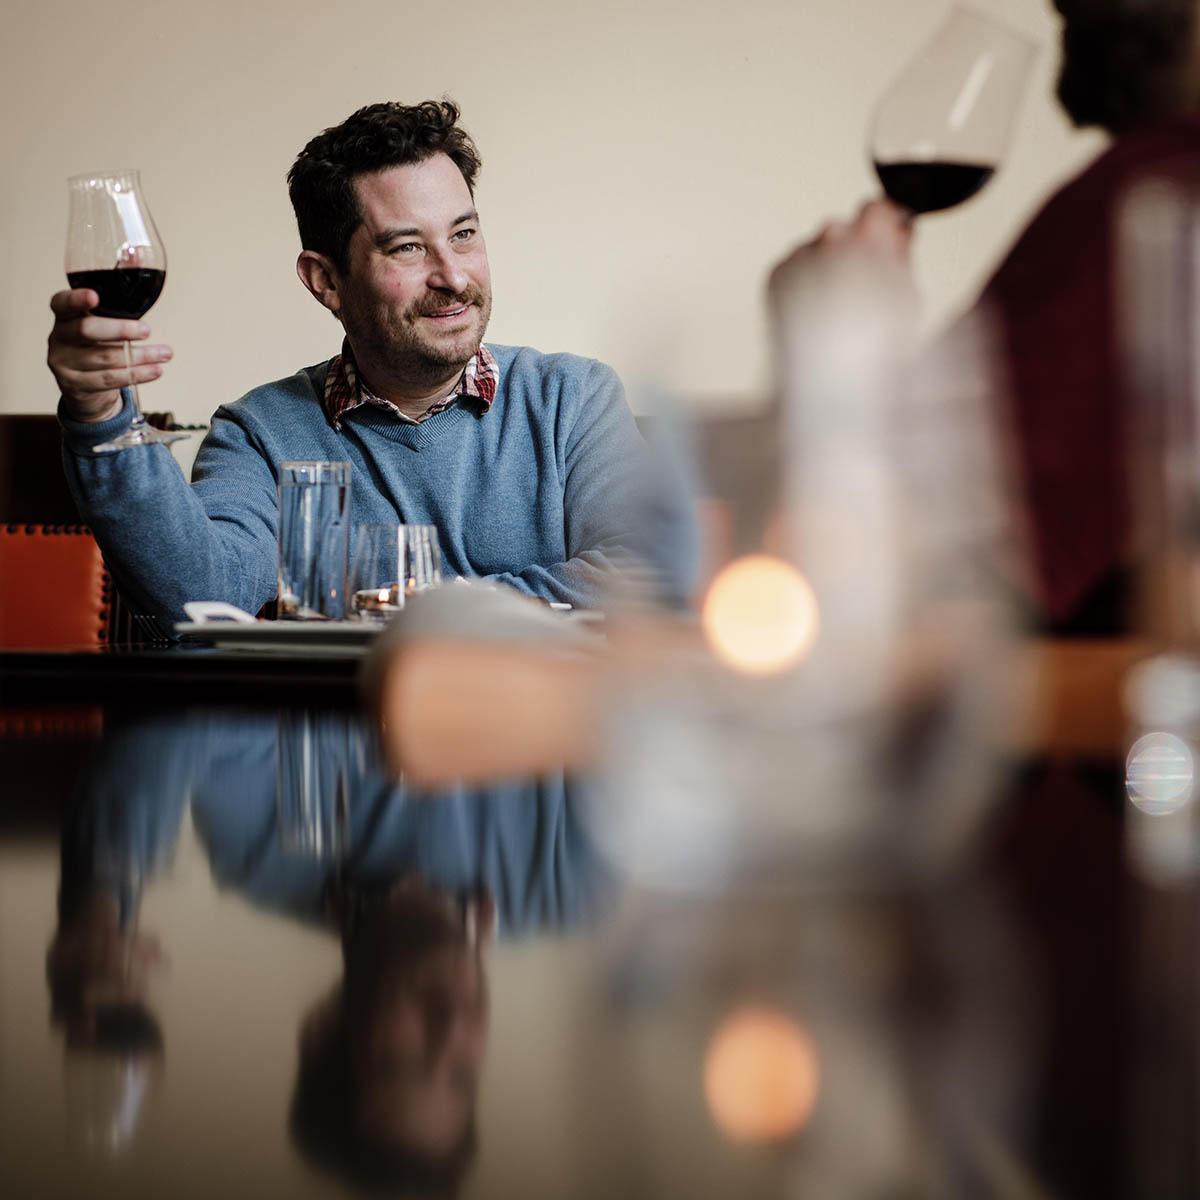 Photo of two men holding glasses of red wine, looking at one another in conversation across a table